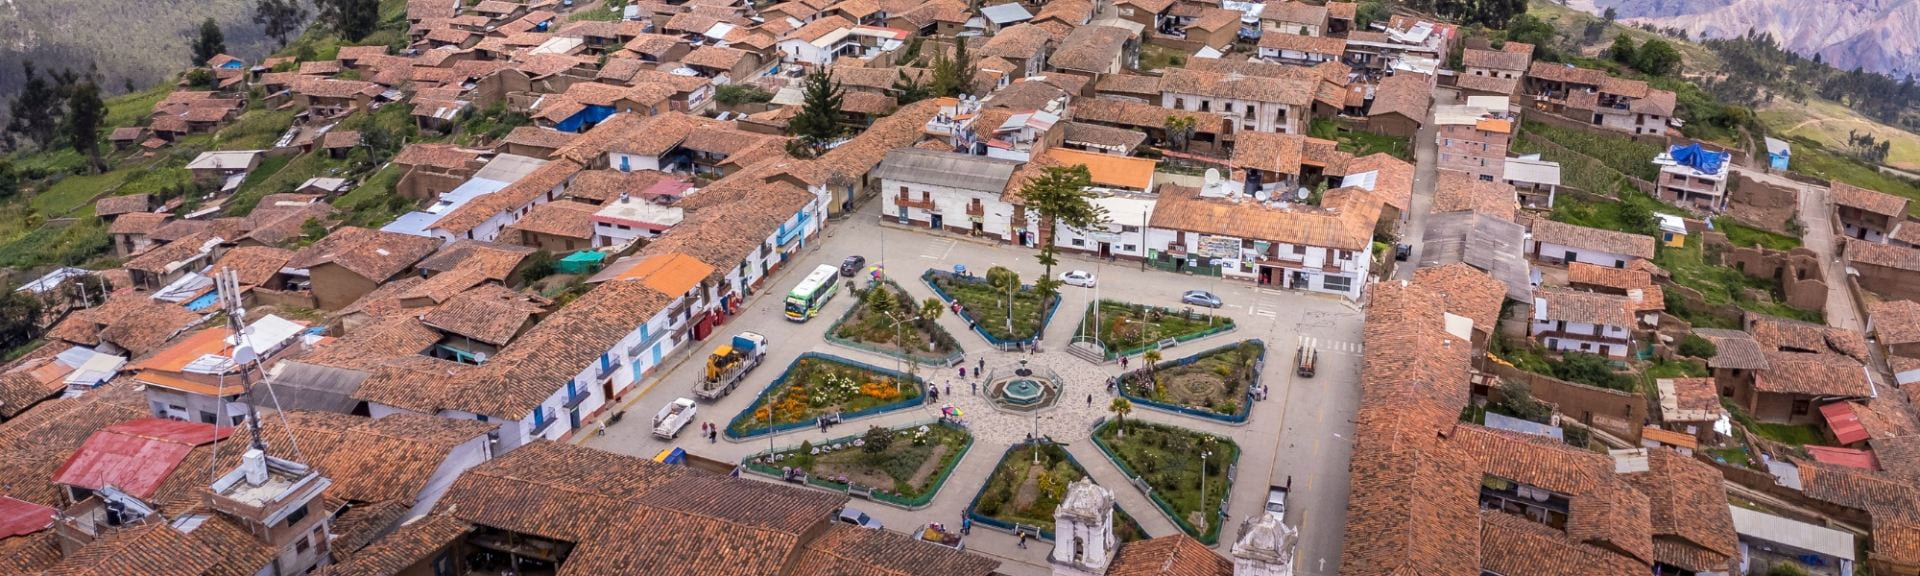 Aerial view of a town in Peru